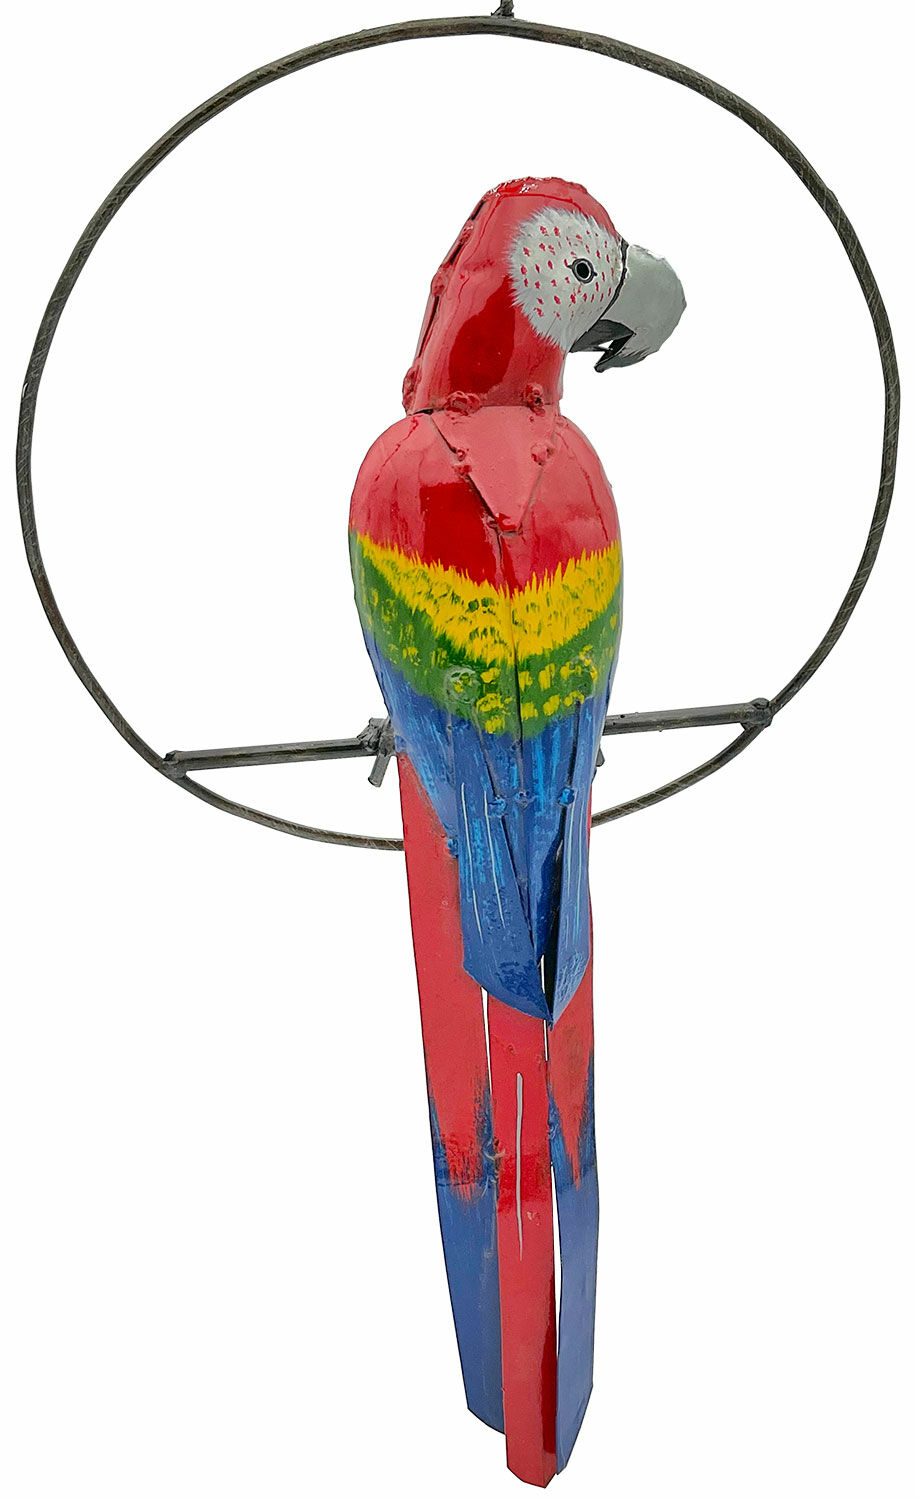 Garden ornament / hanging decoration "Macaw in a Ring"